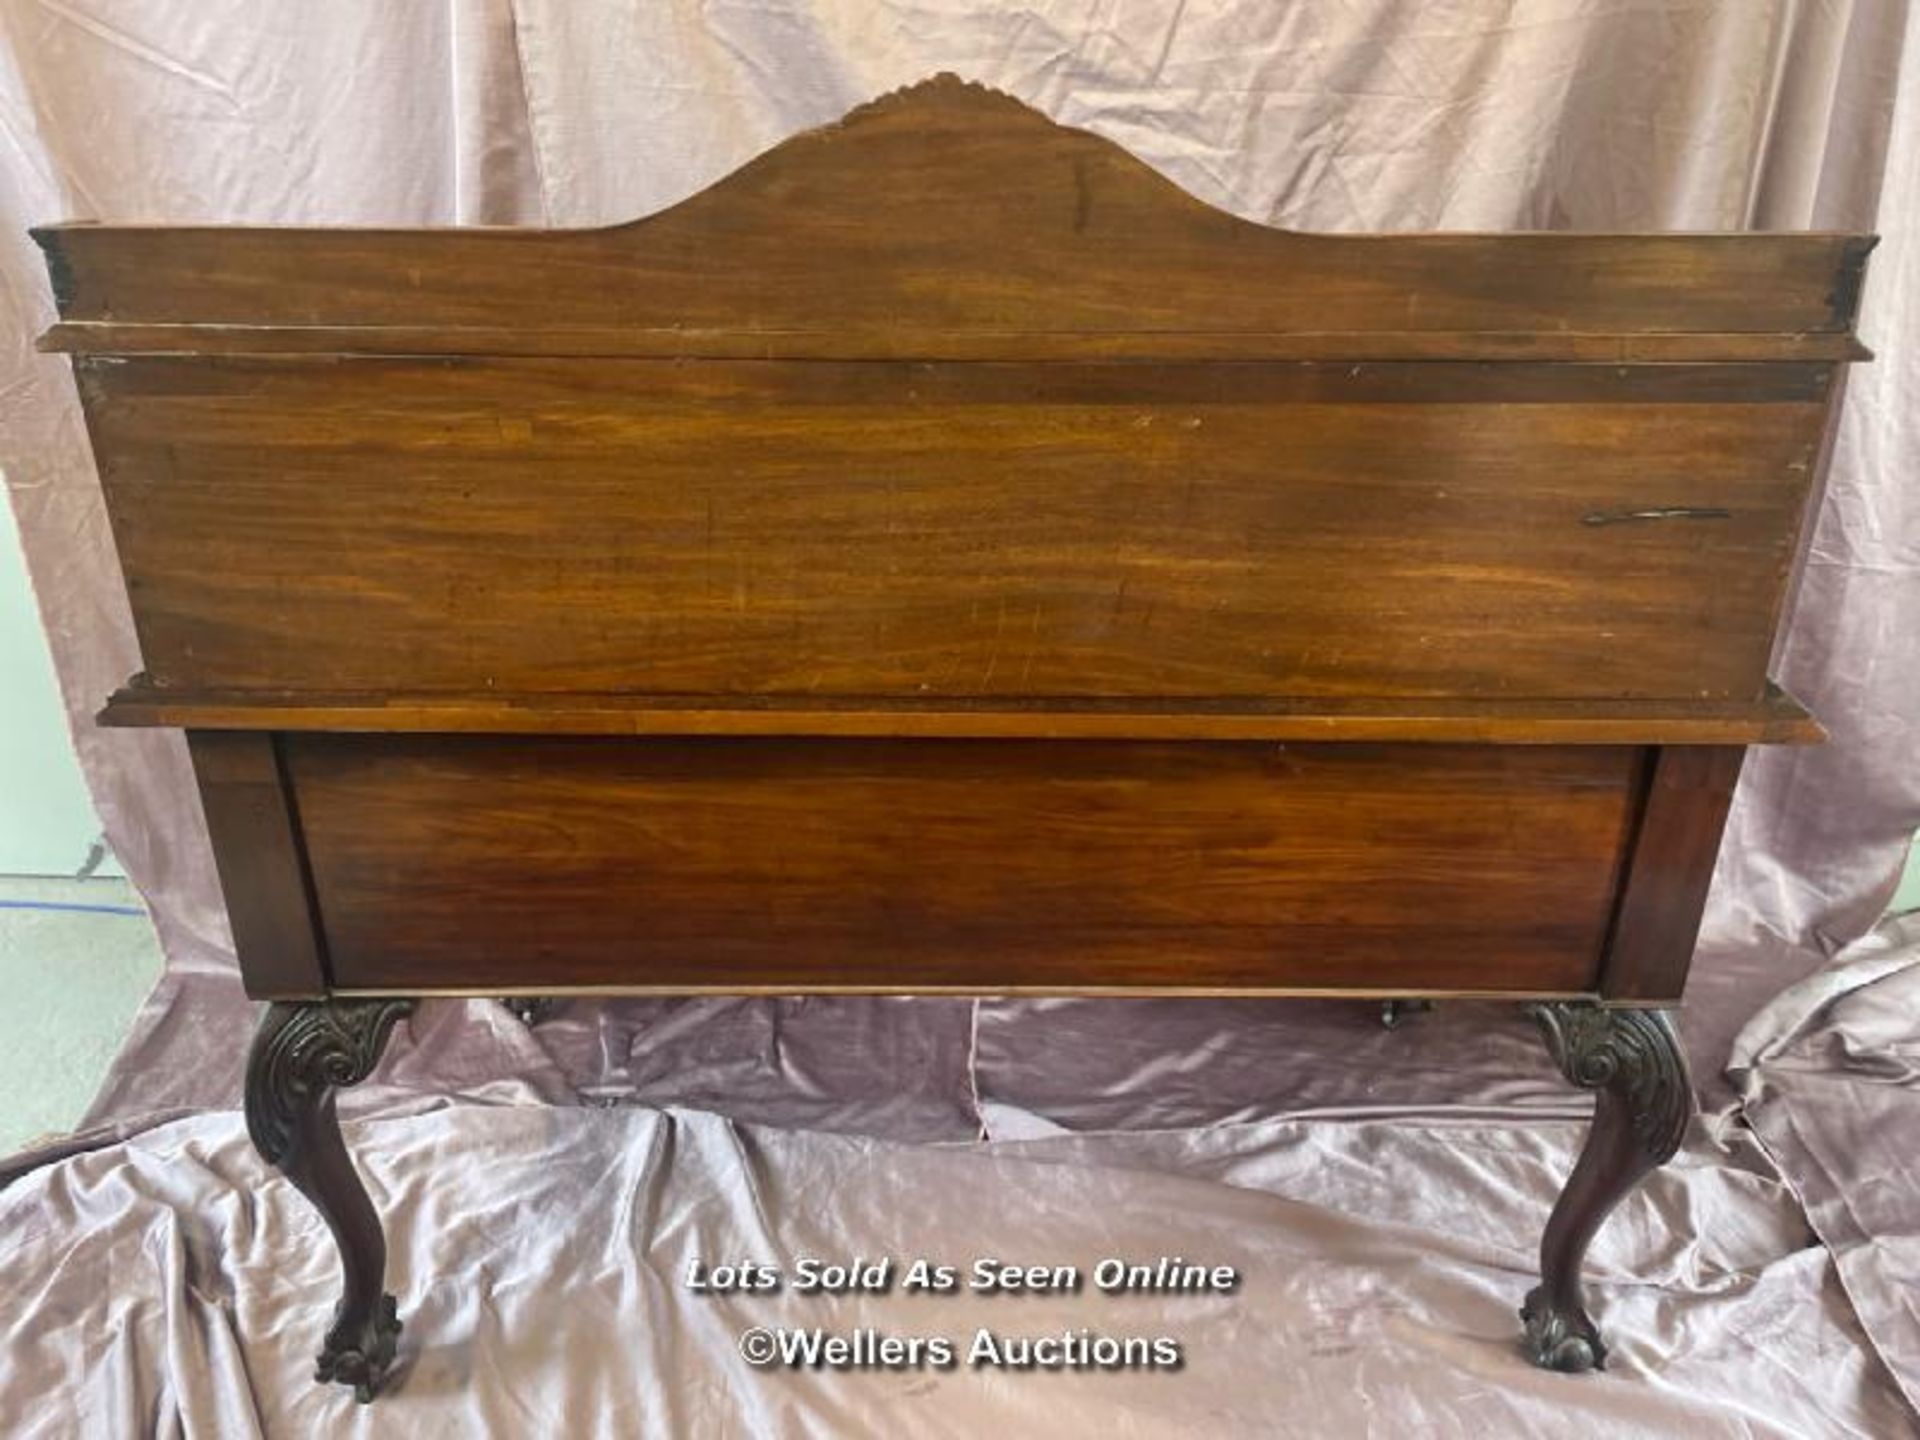 CIRCA 1900, GEOGIAN STYLE HIGHLY DECORATIVE AND CARVED MAHOGANY LINED WRITING DESK WITH LEATHER - Image 9 of 11